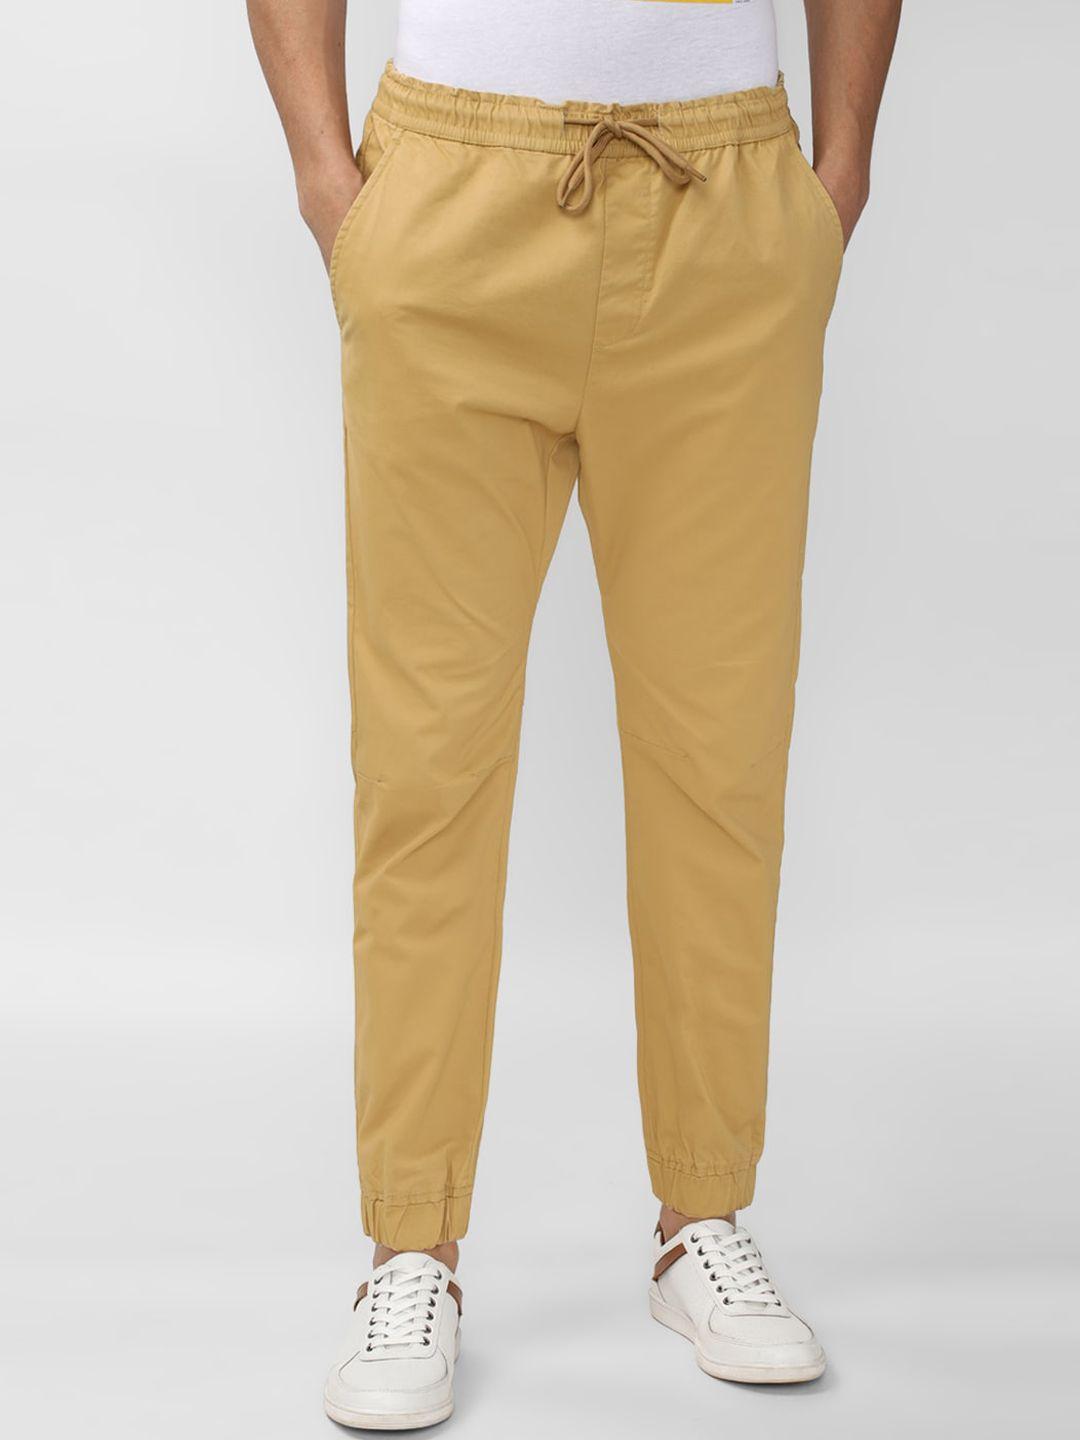 peter england casuals men yellow slim fit joggers trousers